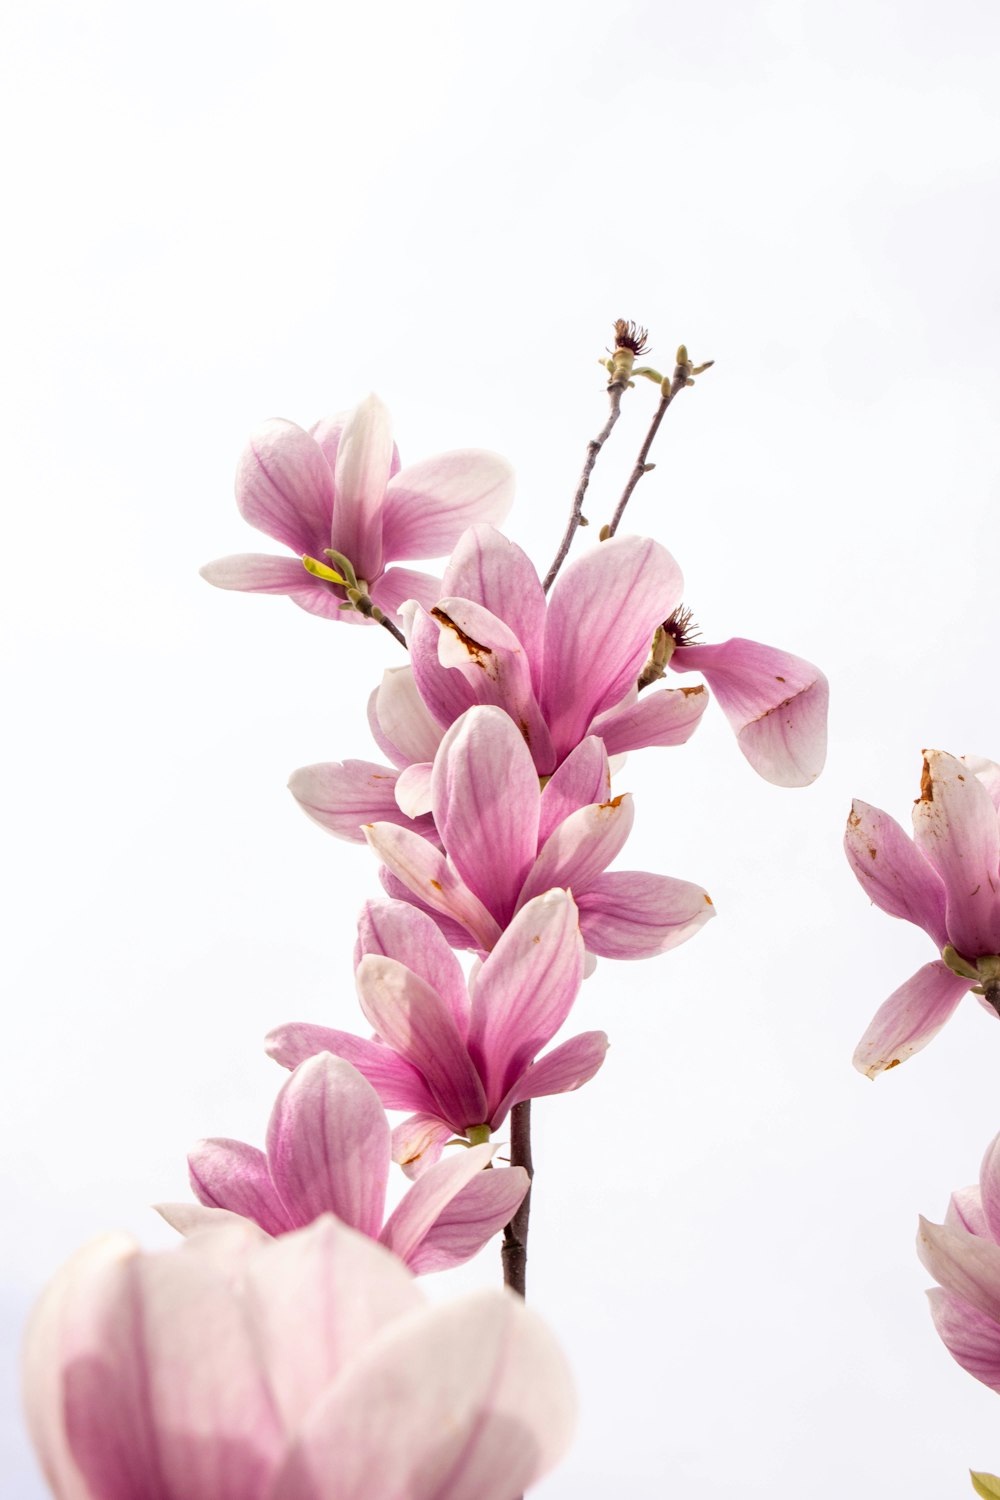 purple and white flowers on white background